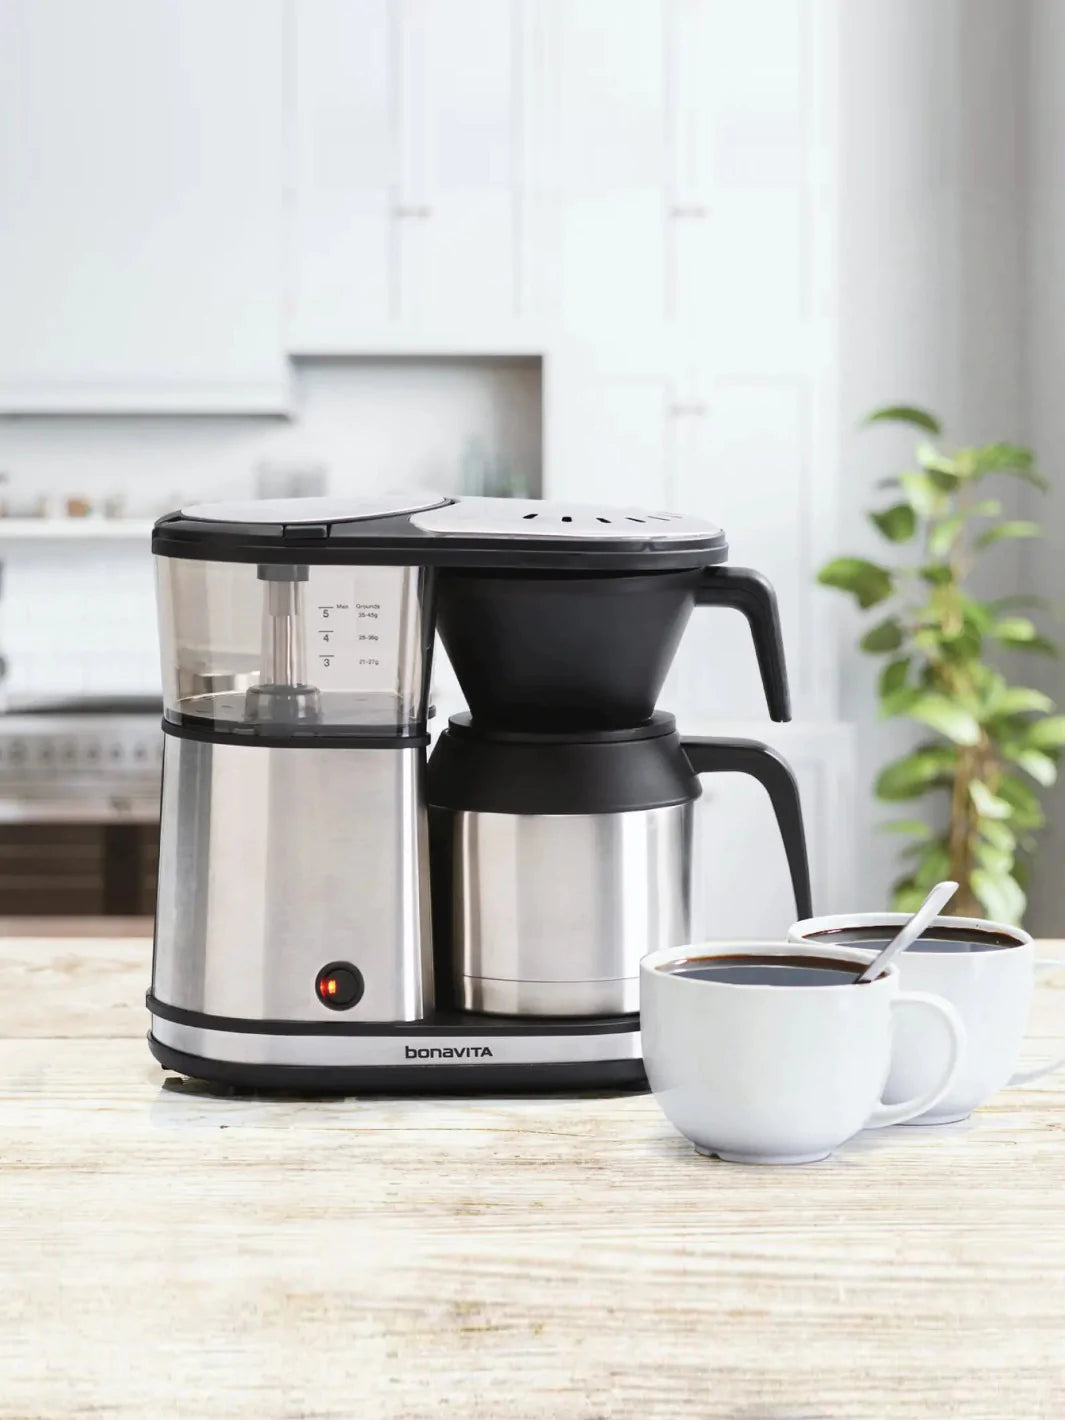 https://cdn.shopify.com/s/files/1/0633/1947/4396/products/bonavita_thermal-carafe-coffee-brewer_5-cup_kitchen-table_1800x1800_84f7ab85-2c39-439a-85c1-a06ea0d13f1b.webp?v=1676419981